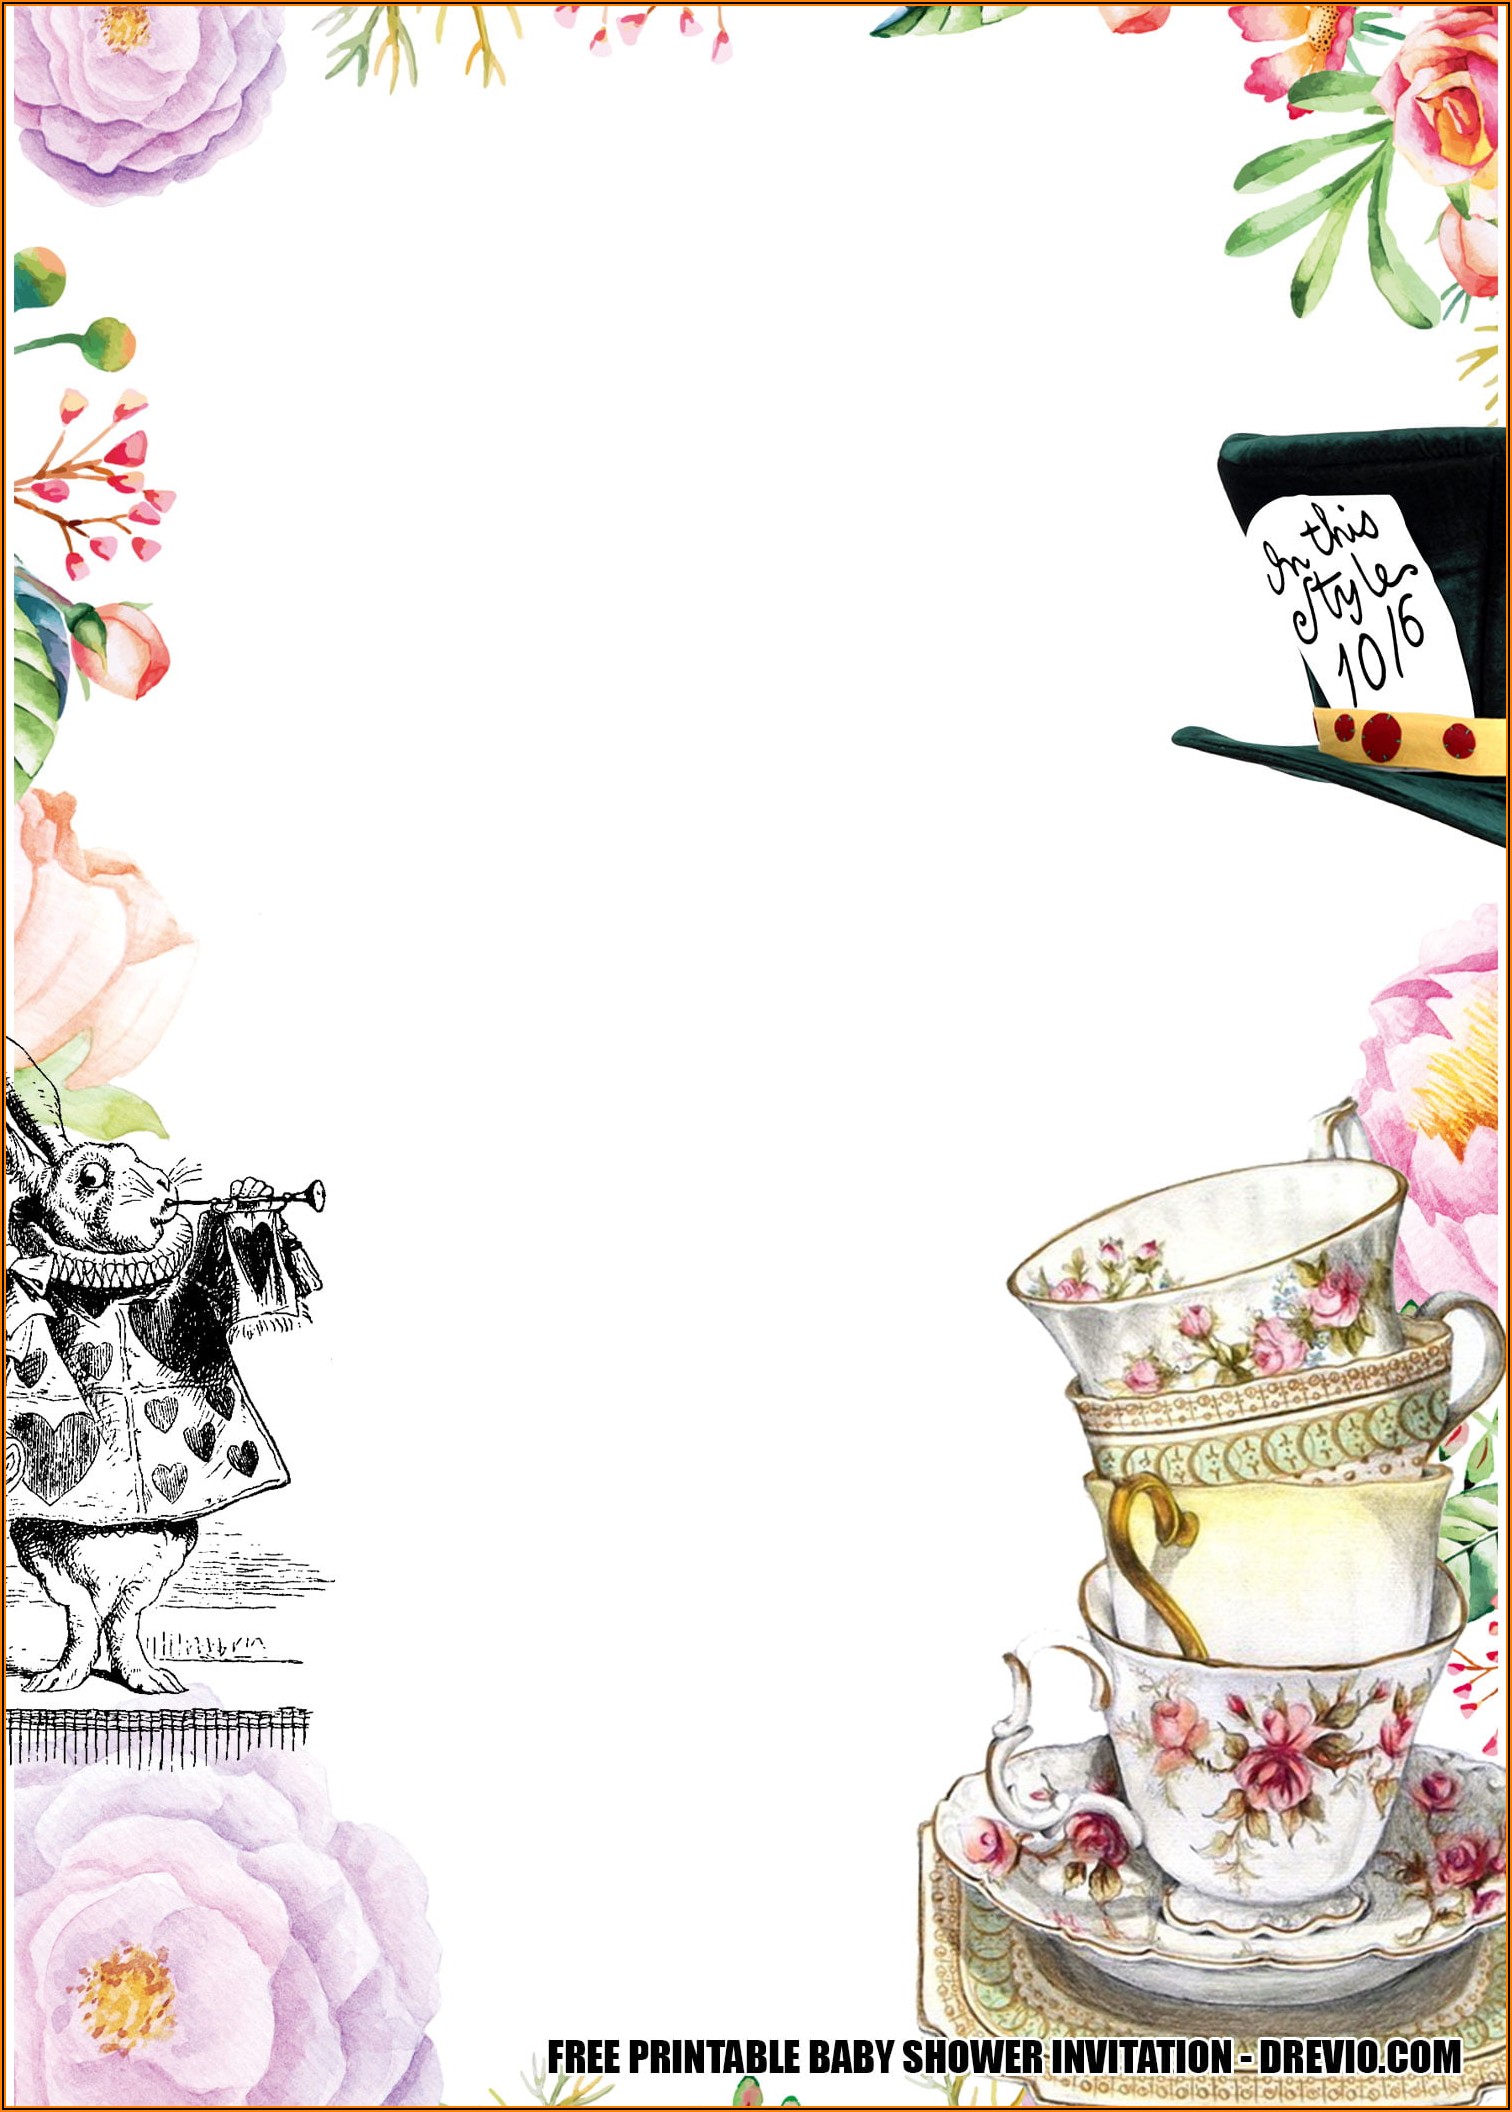 Blank Mad Hatter Tea Party Invitations Templates Free